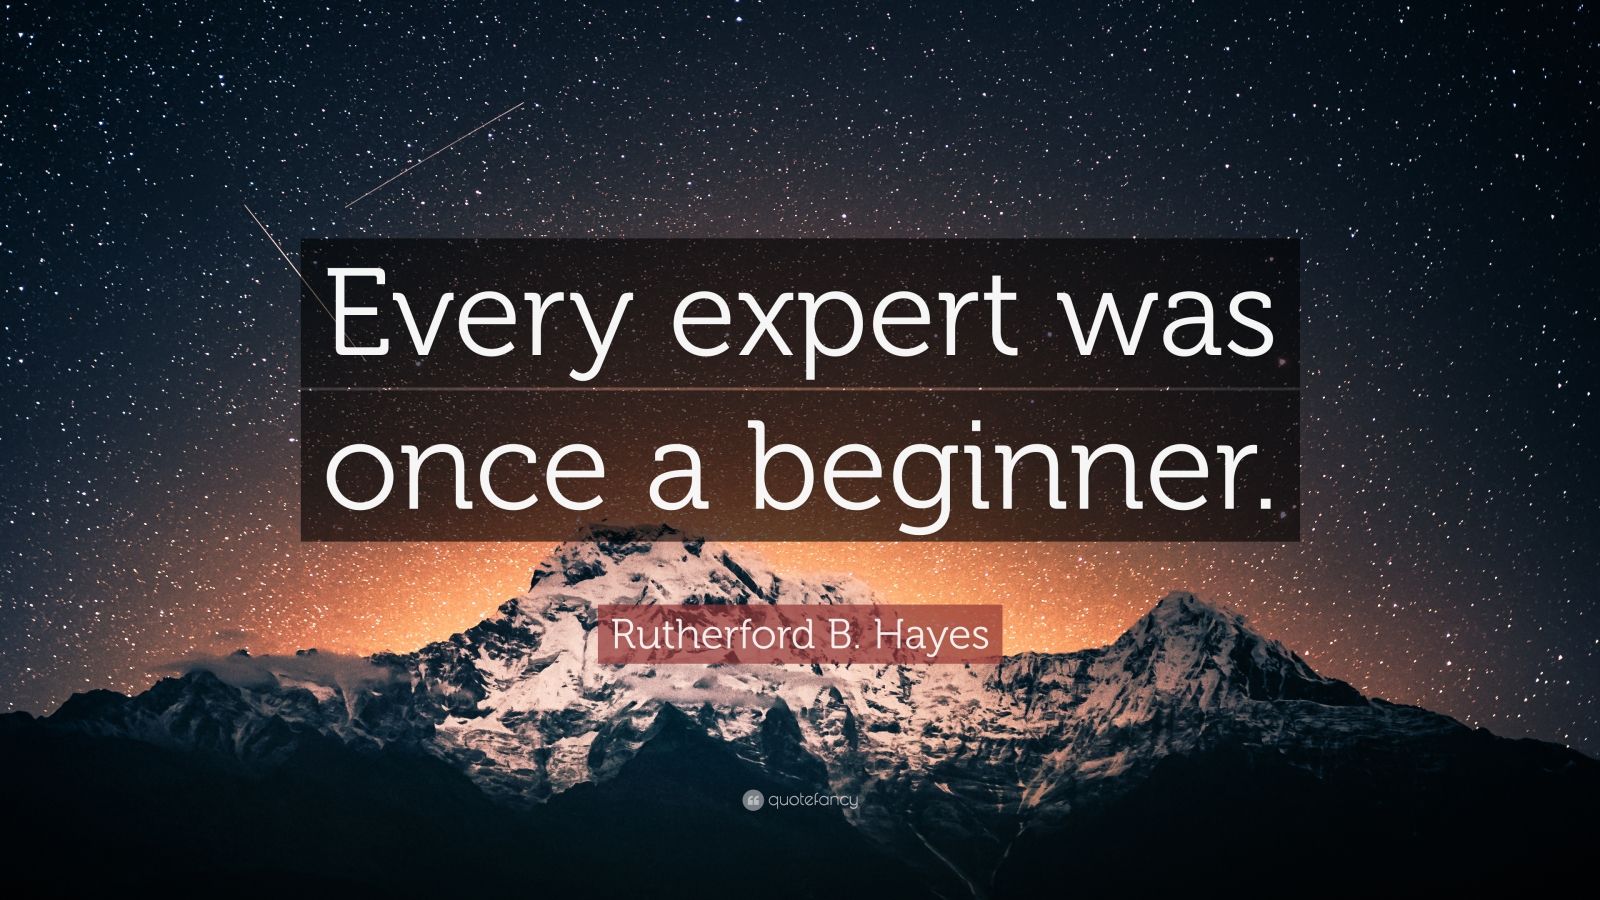 Rutherford B. Hayes Quote: “Every expert was once a beginner.” (9